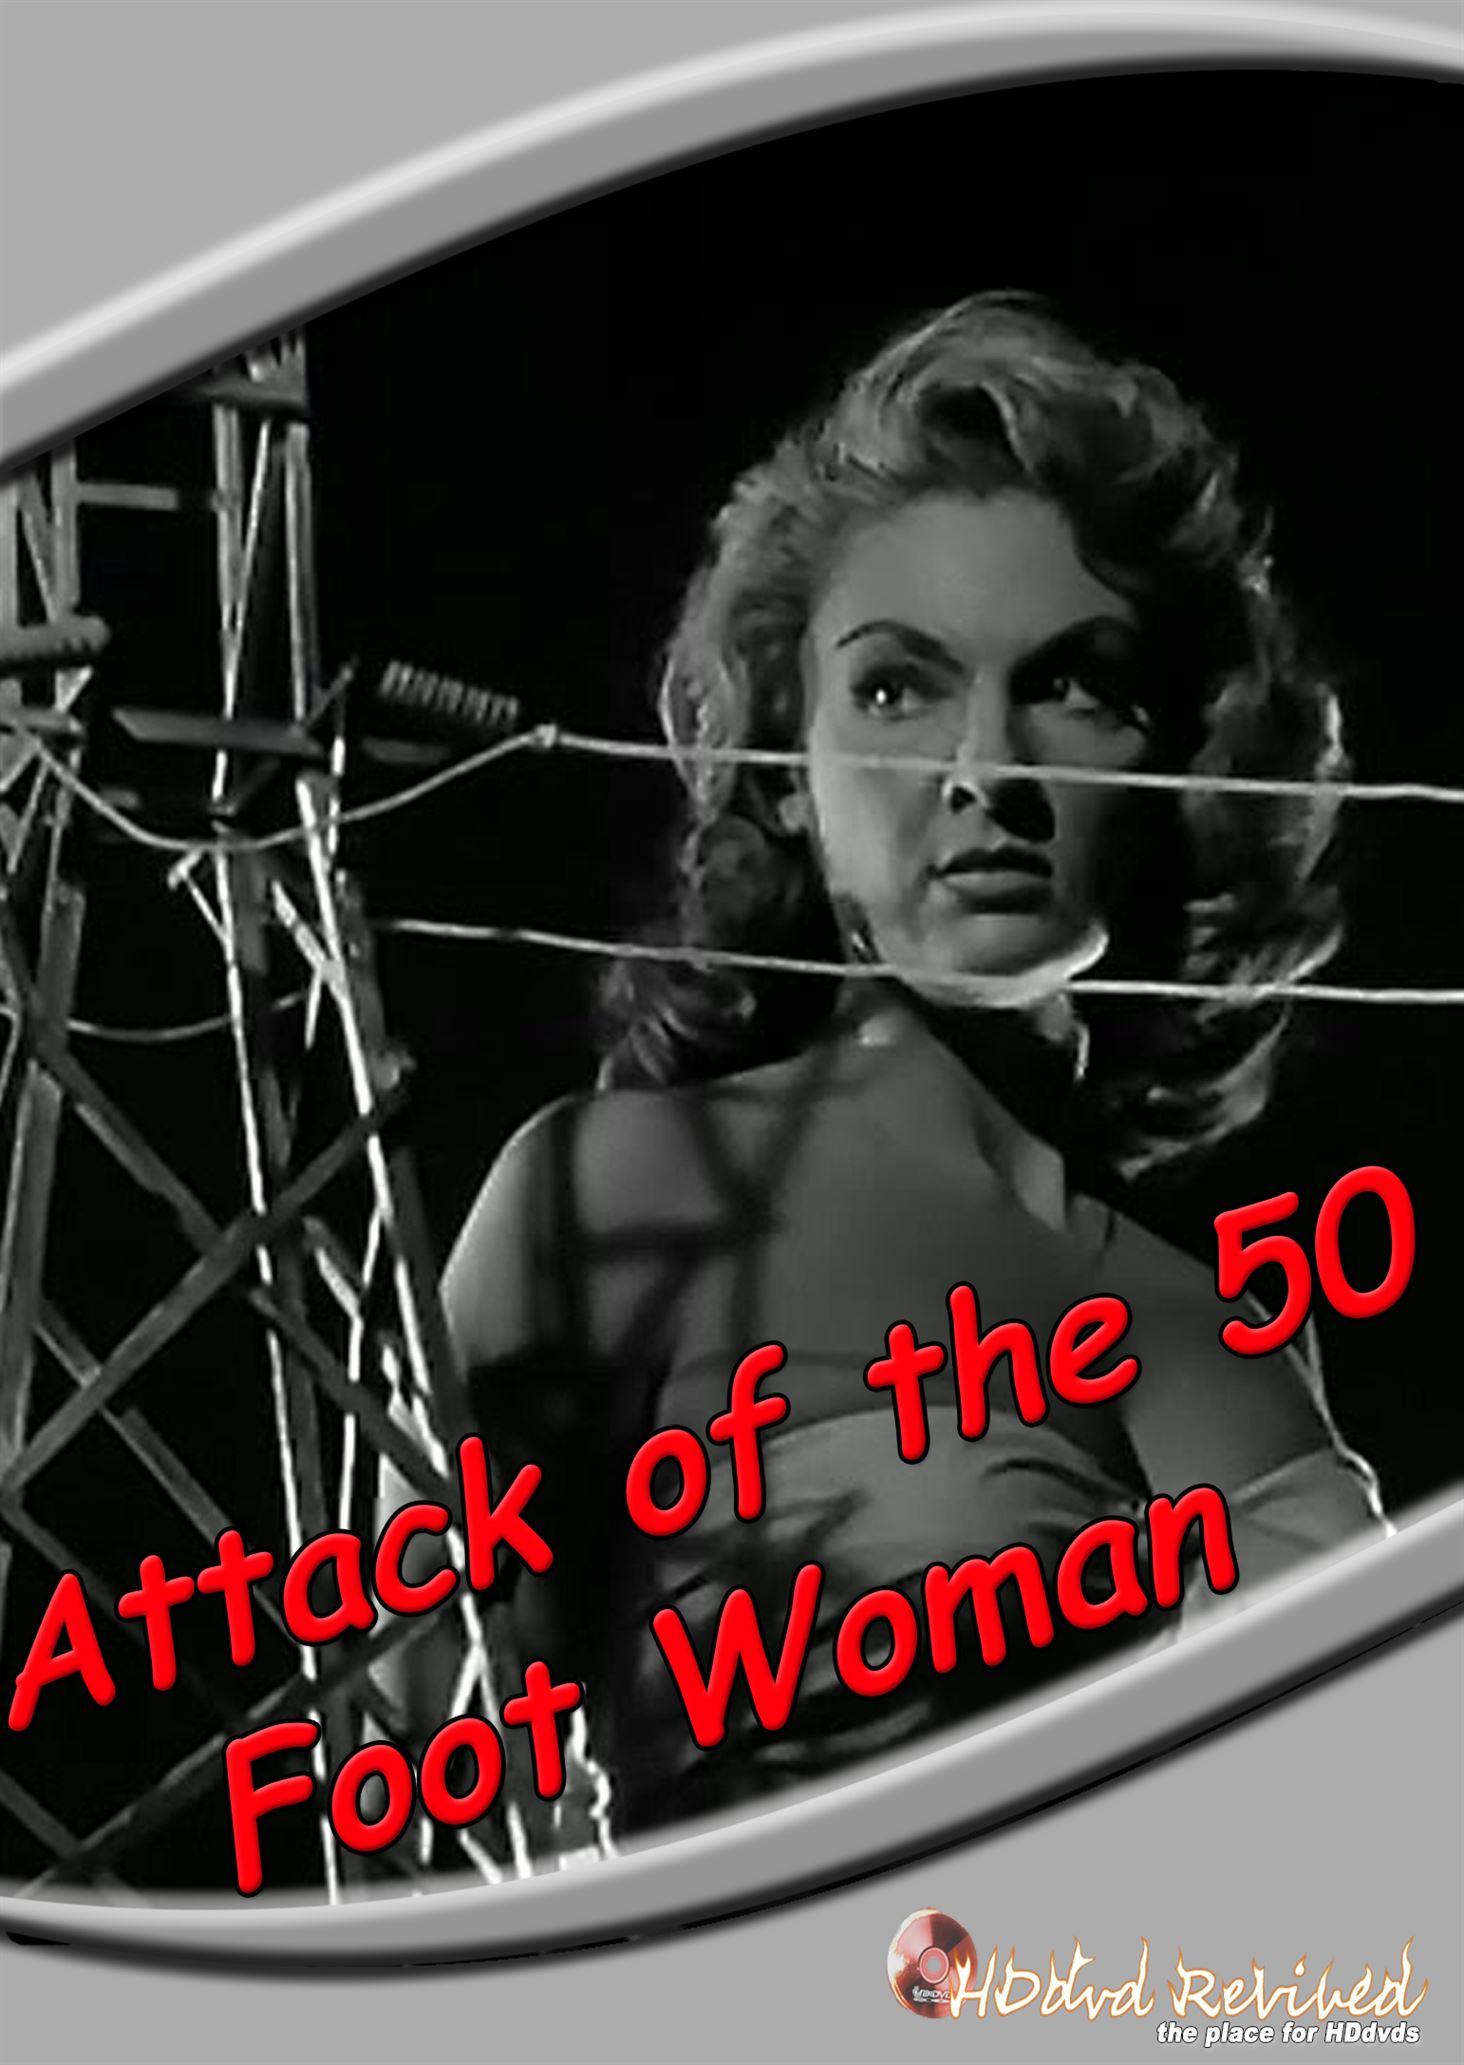 Attack of the 50 Foot Woman (1958) DVD (HDDVD-Revived) - UK Seller